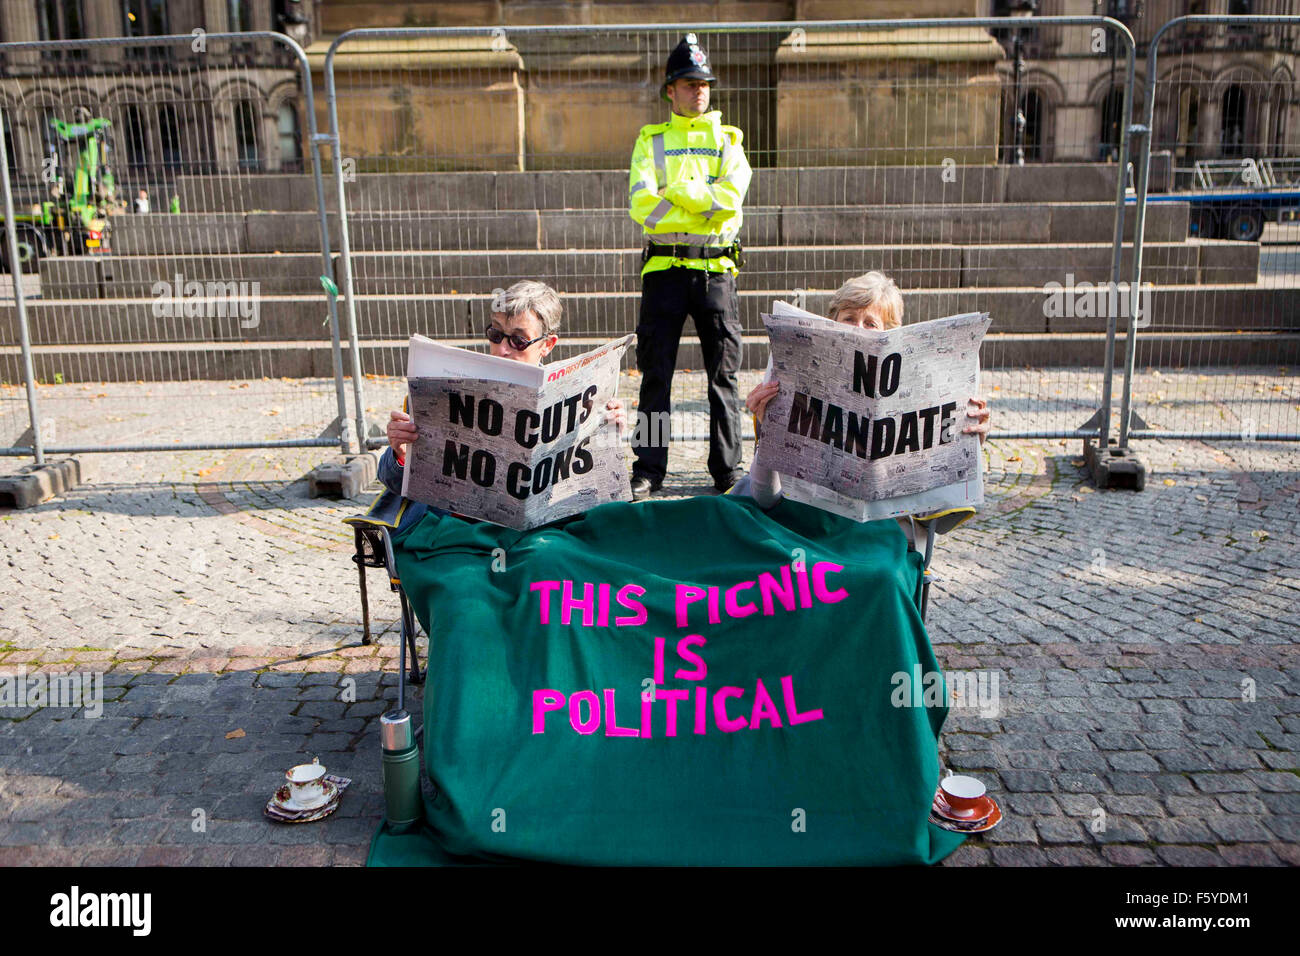 Manchester anti-austerity protest rally Stock Photo